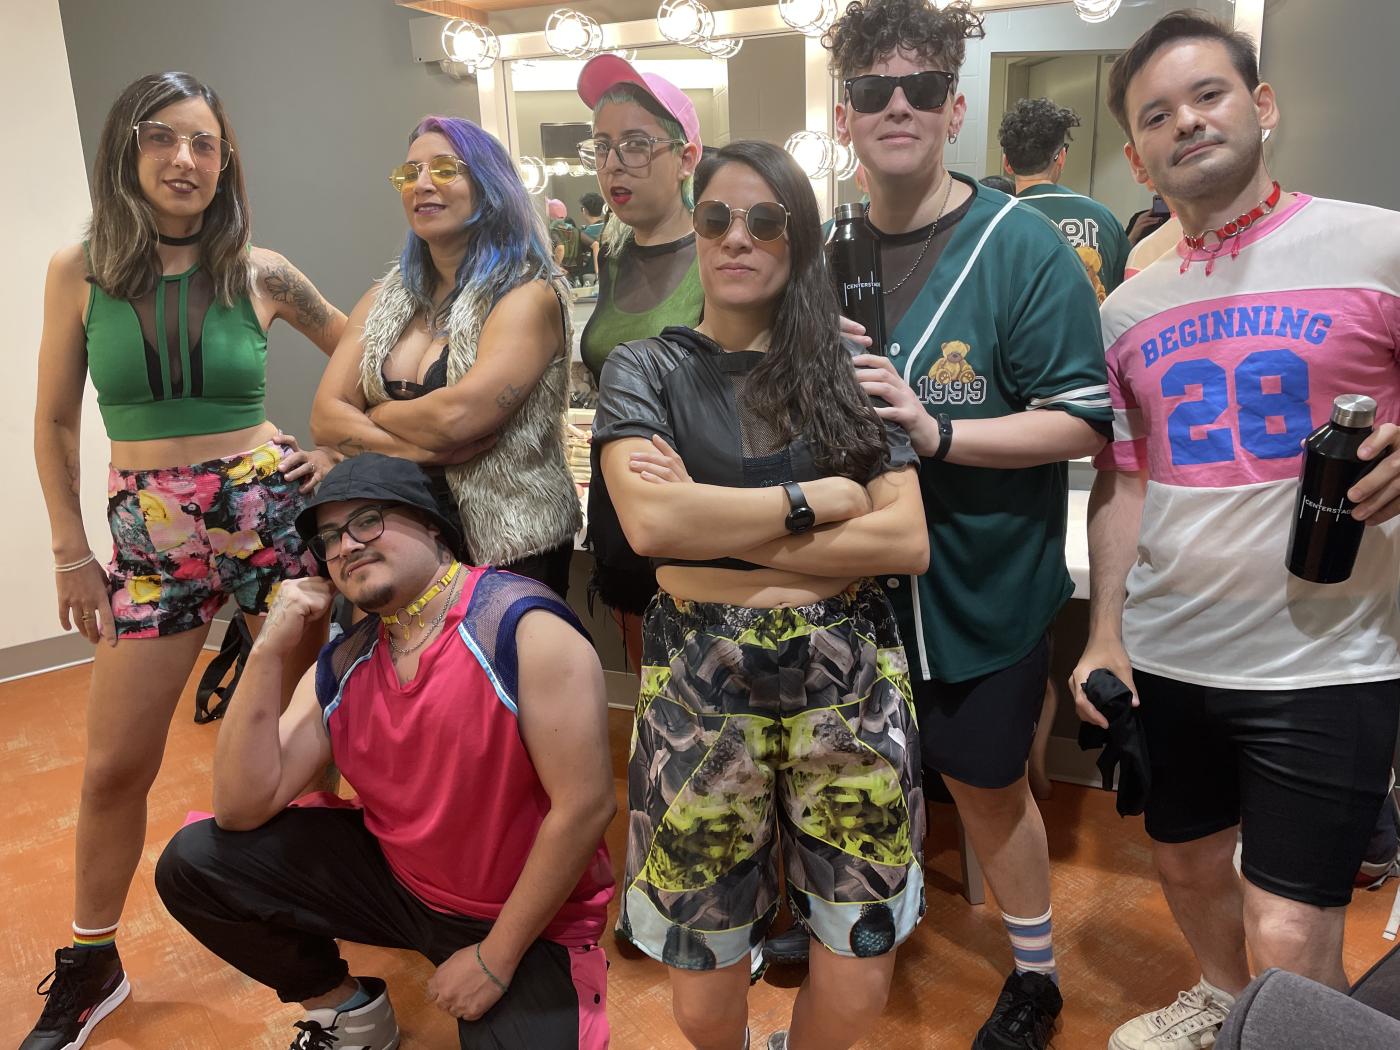 A band of seven musicians wearing colorful street clothes pose backstage